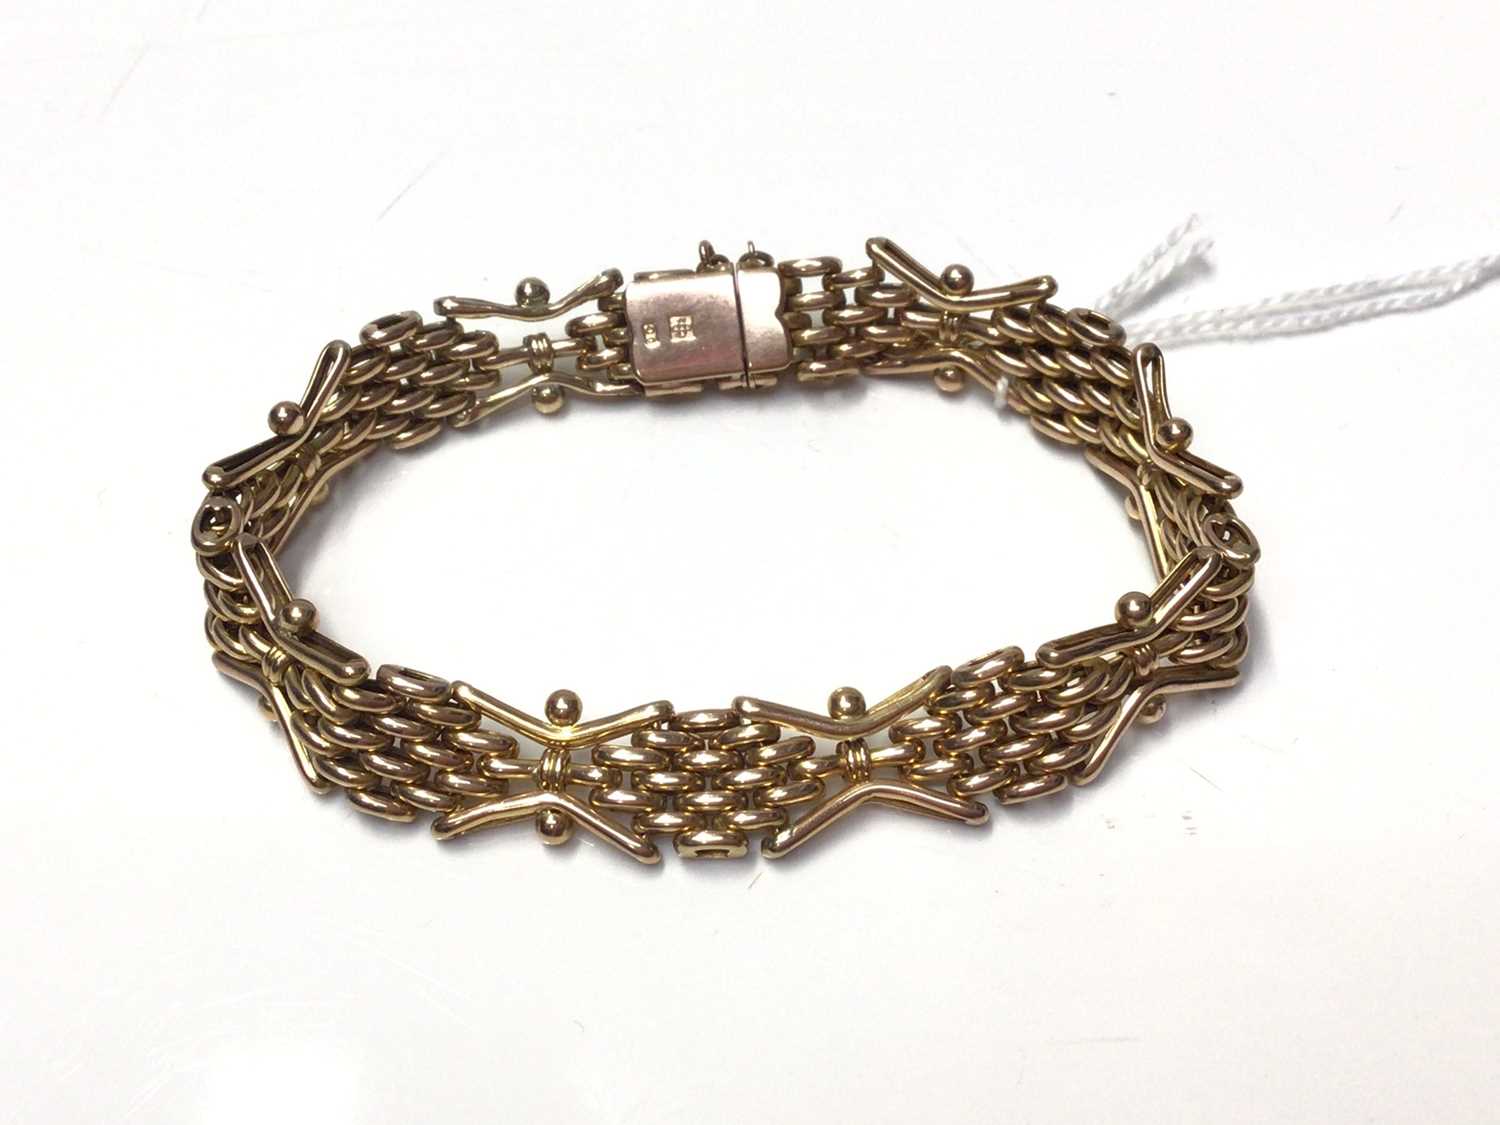 Lot 151 - 9ct gold gate bracelet with articulated fancy links